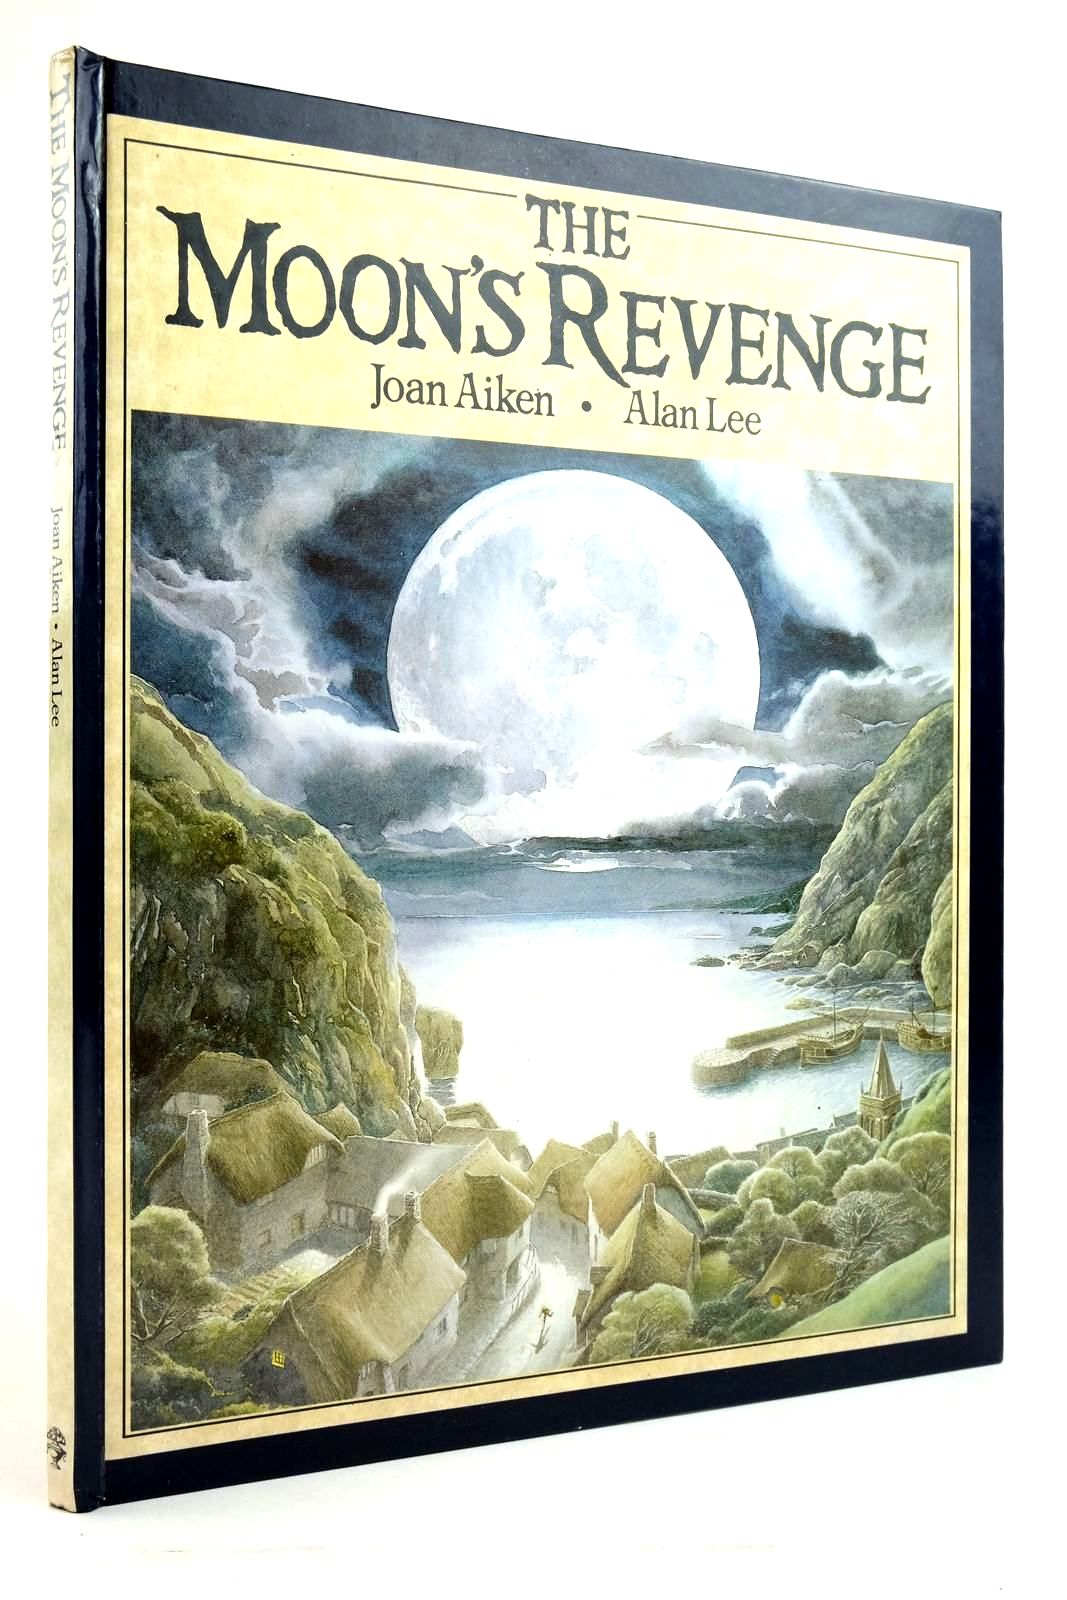 Photo of THE MOON'S REVENGE written by Aiken, Joan illustrated by Lee, Alan published by Jonathan Cape (STOCK CODE: 2135557)  for sale by Stella & Rose's Books